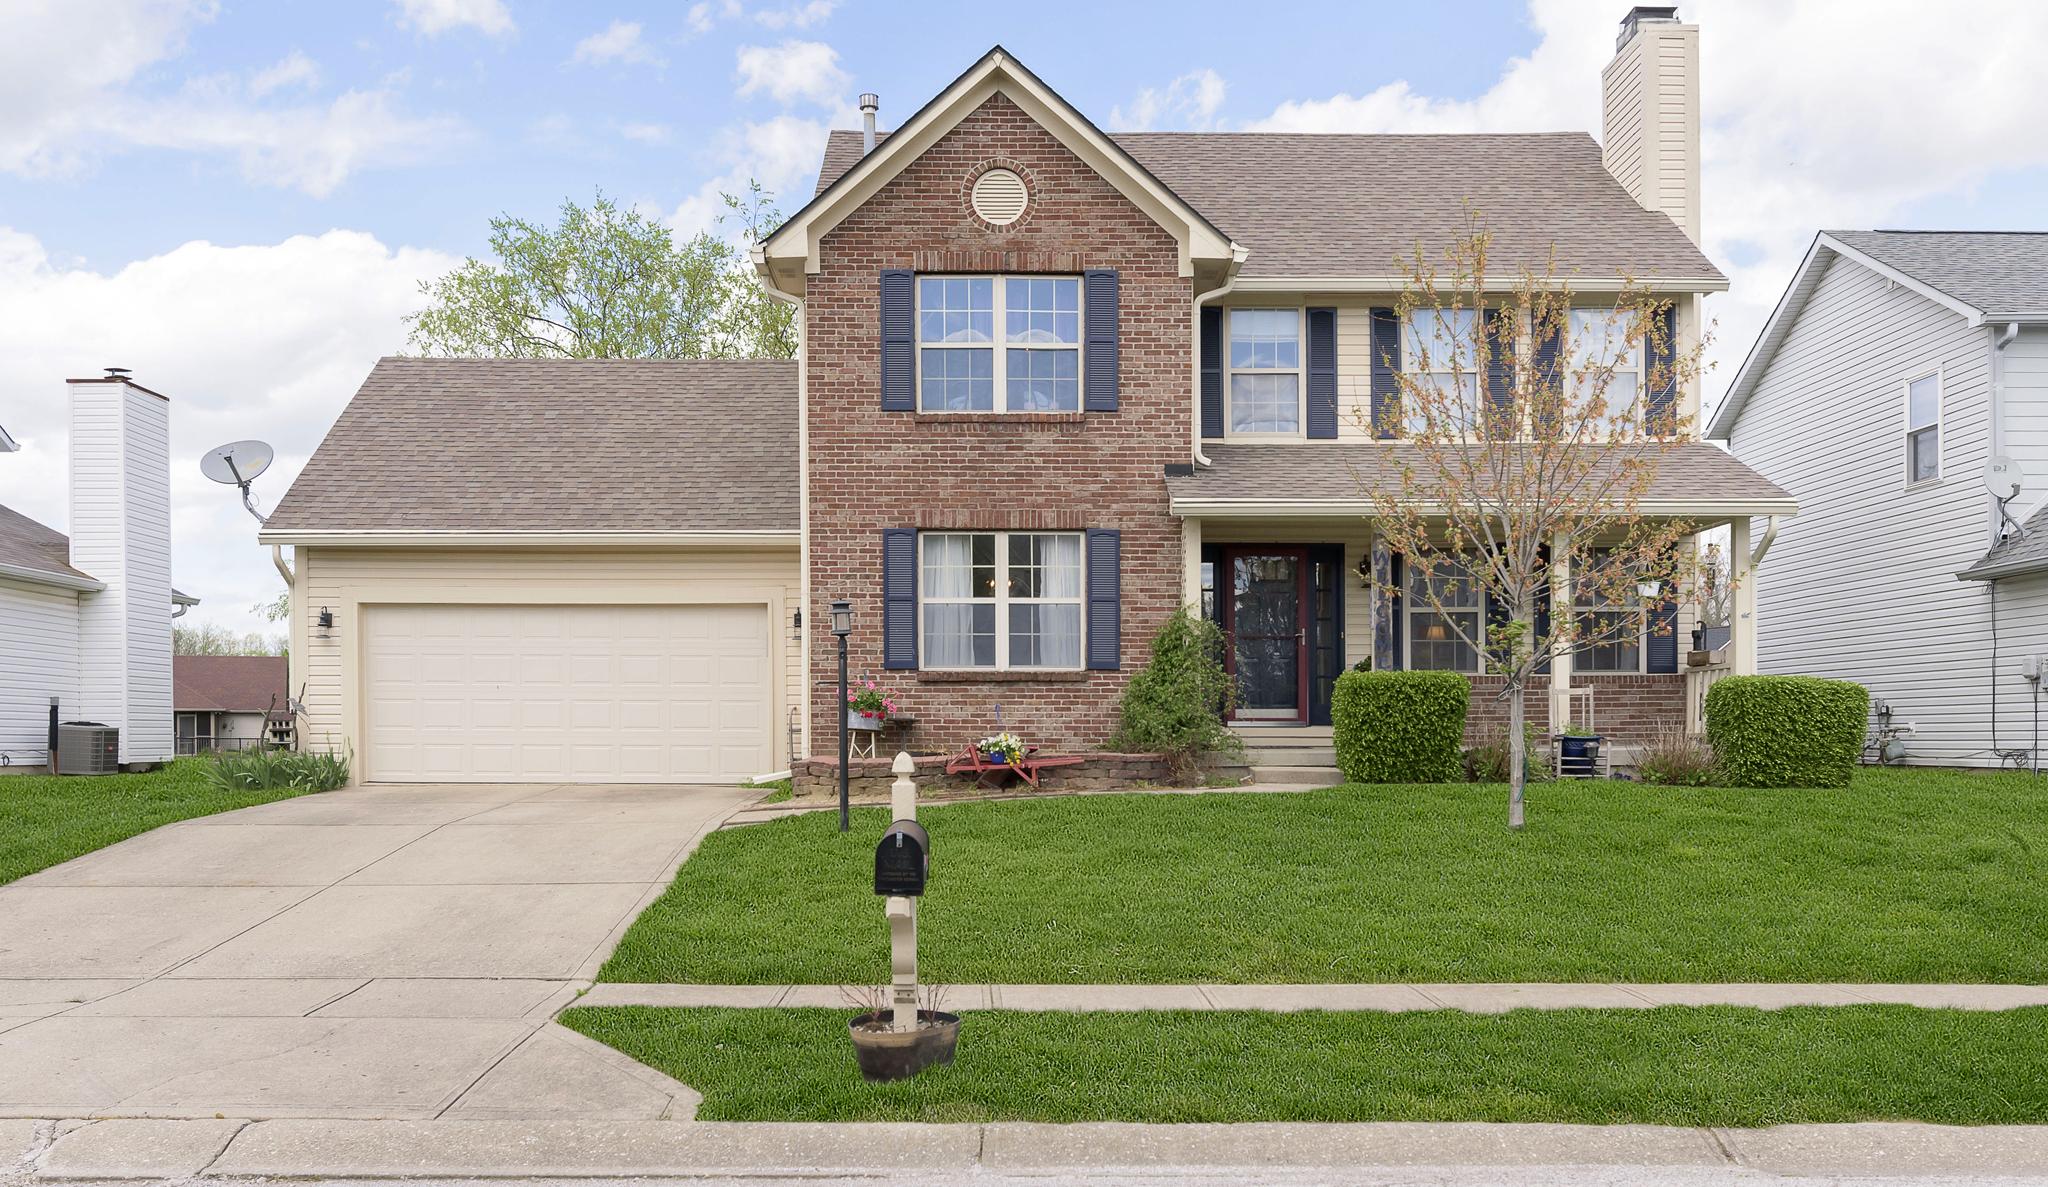 Photo one of 7116 Bel Moore Cir Indianapolis IN 46259 | MLS 21974622